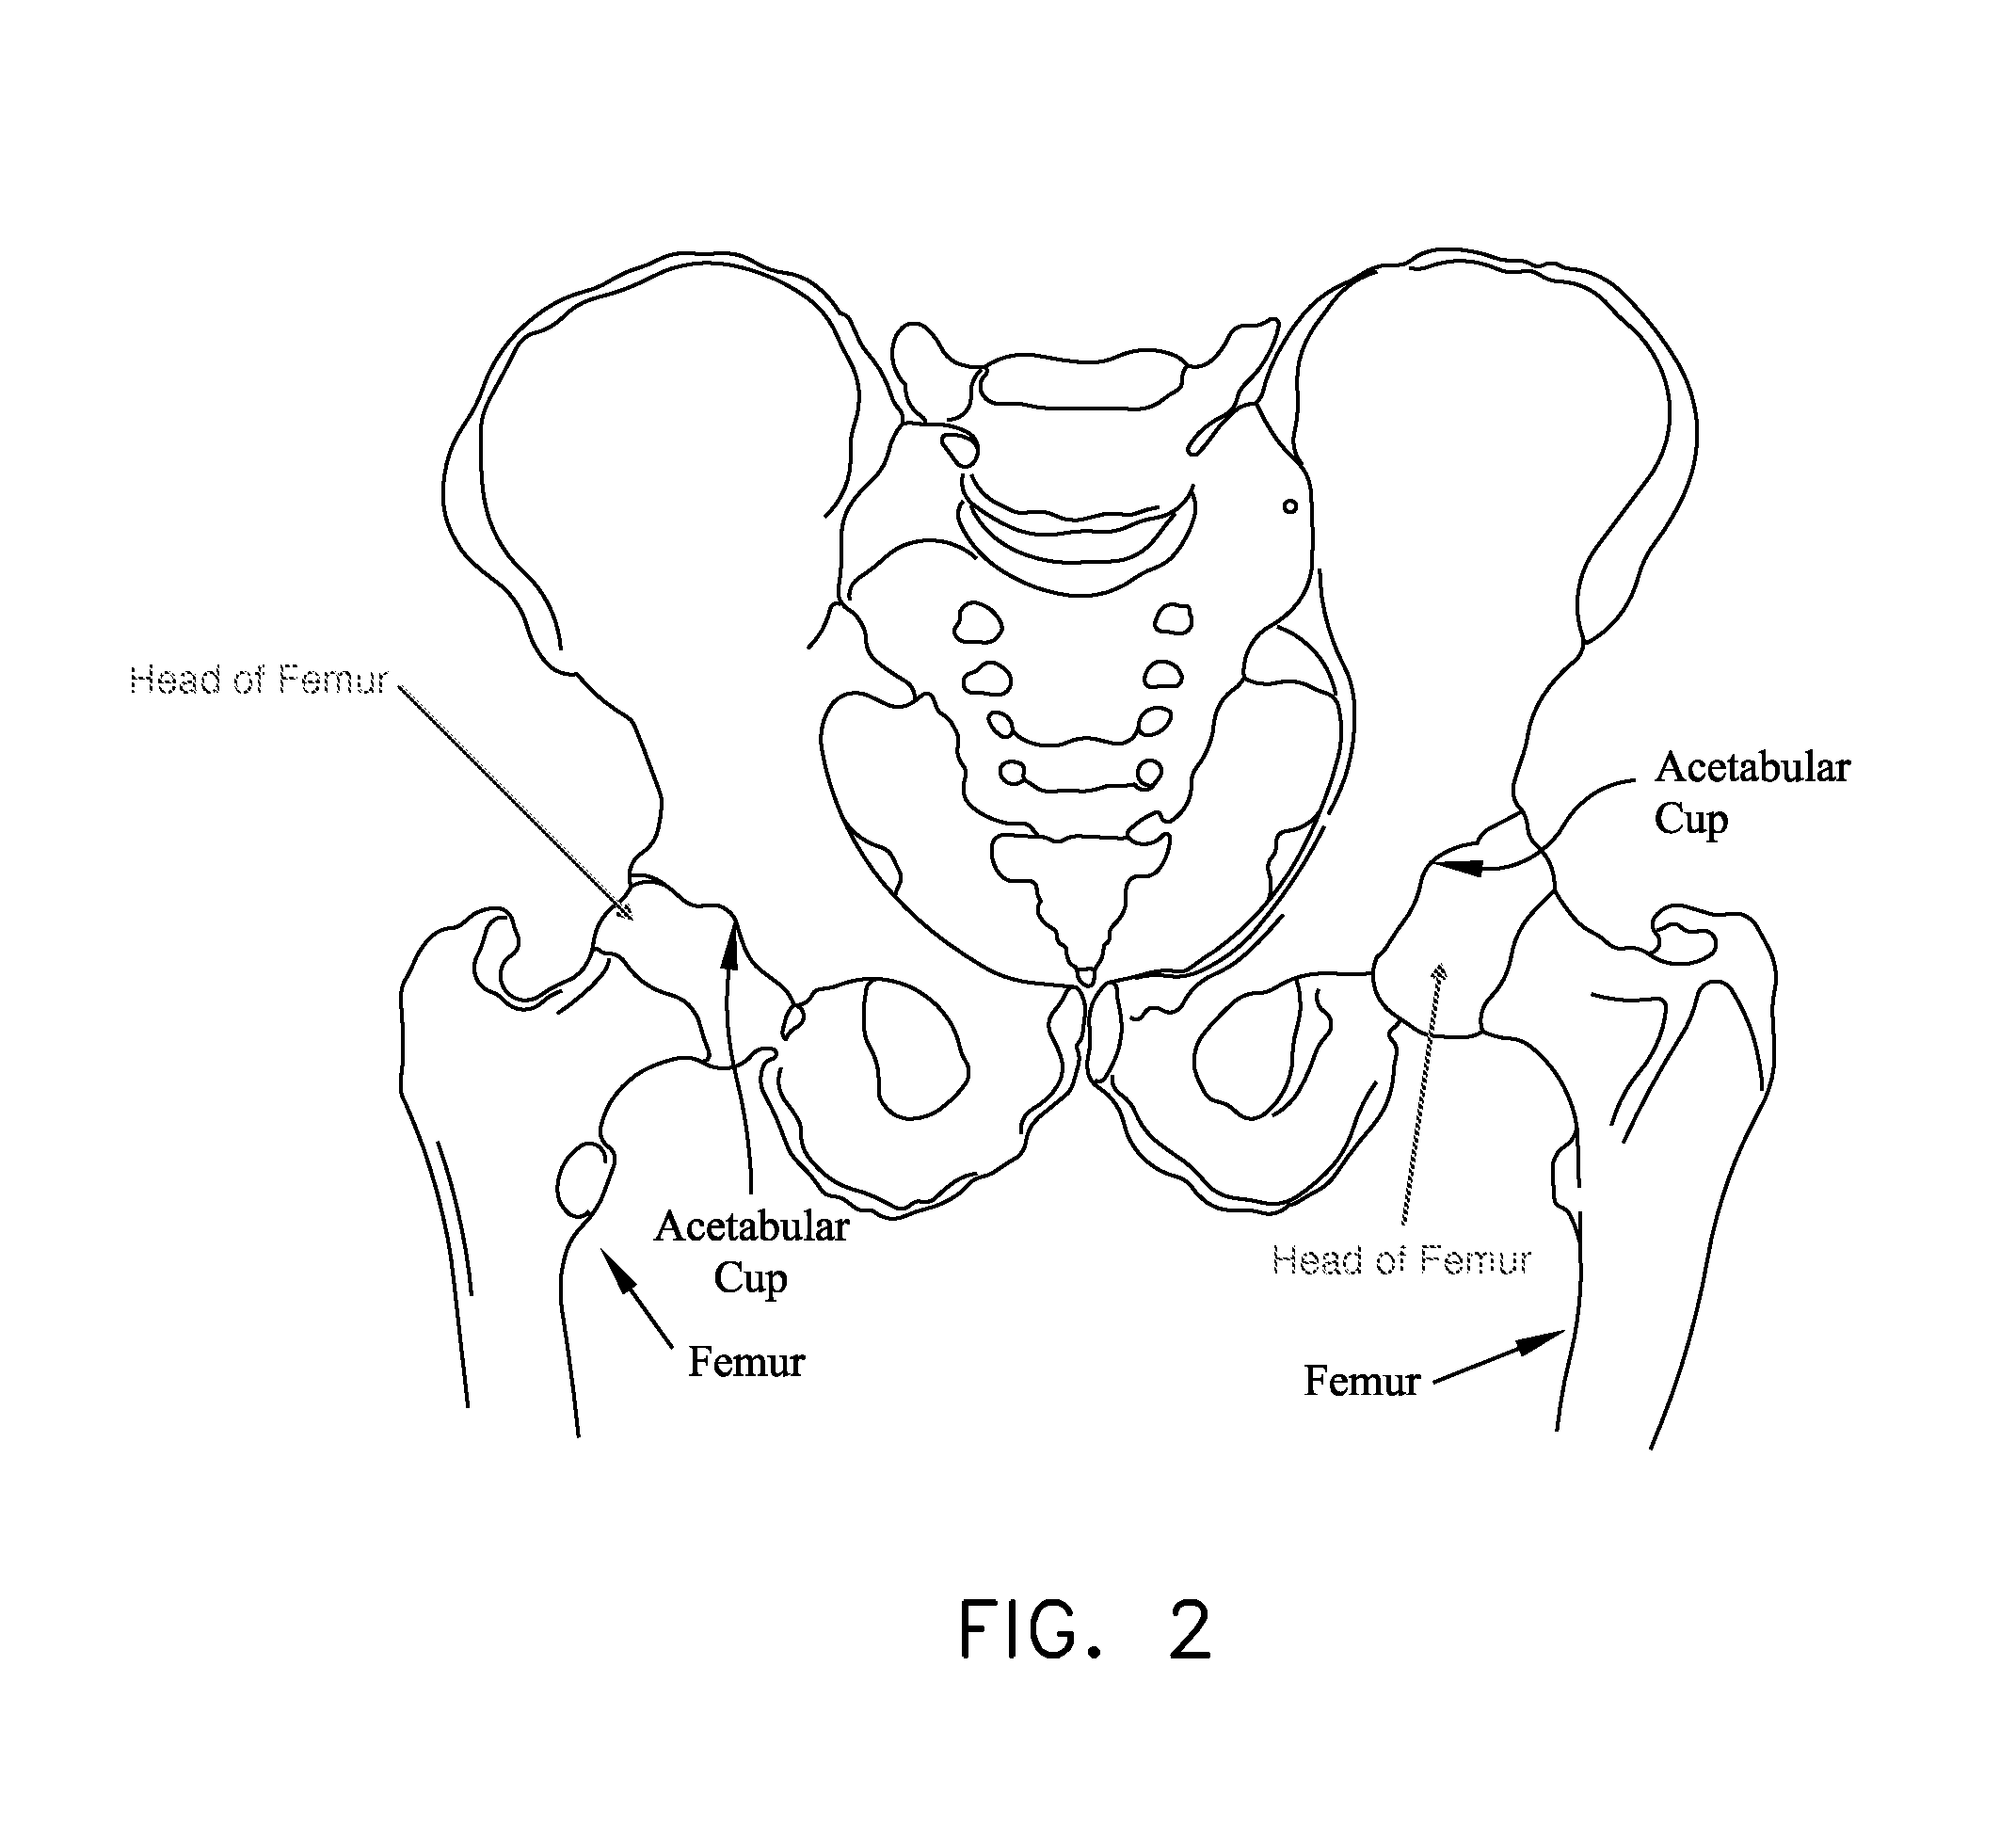 Laterally-expandable access cannula for accessing the interior of a hip joint